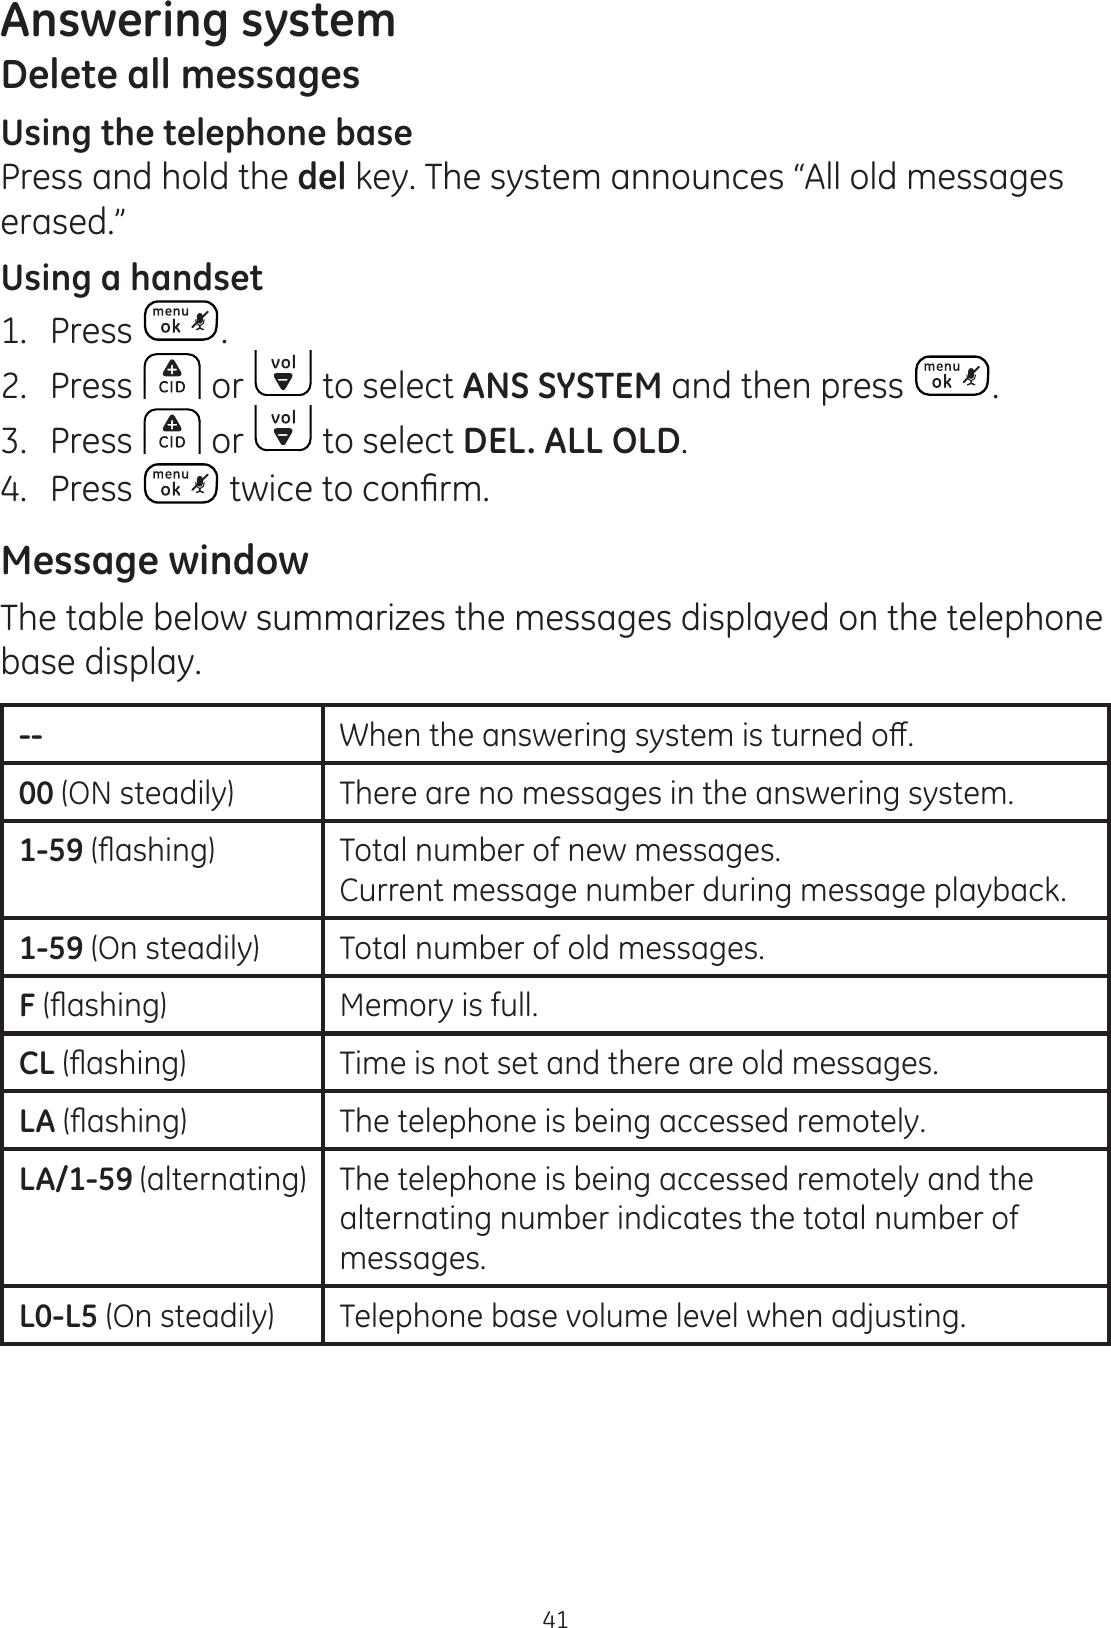 Answering system41Delete all messagesUsing the telephone basePress and hold the del key. The system announces “All old messages erased.”Using a handset1.  Press .2.  Press   or   to select ANS SYSTEM and then press  . 3.  Press   or   to select DEL. ALL OLD.4.  Press  WZLFHWRFRQ¿UPMessage windowThe table below summarizes the messages displayed on the telephone base display. -- :KHQWKHDQVZHULQJV\VWHPLVWXUQHGRȺ00 (ON steadily) There are no messages in the answering system.1-59ÀDVKLQJ Total number of new messages.Current message number during message playback.1-59 (On steadily) Total number of old messages. FÀDVKLQJ Memory is full.CLÀDVKLQJ Time is not set and there are old messages.LAÀDVKLQJ The telephone is being accessed remotely. LA/1-59 (alternating) The telephone is being accessed remotely and the alternating number indicates the total number of messages. L0-L5 (On steadily) Telephone base volume level when adjusting. 